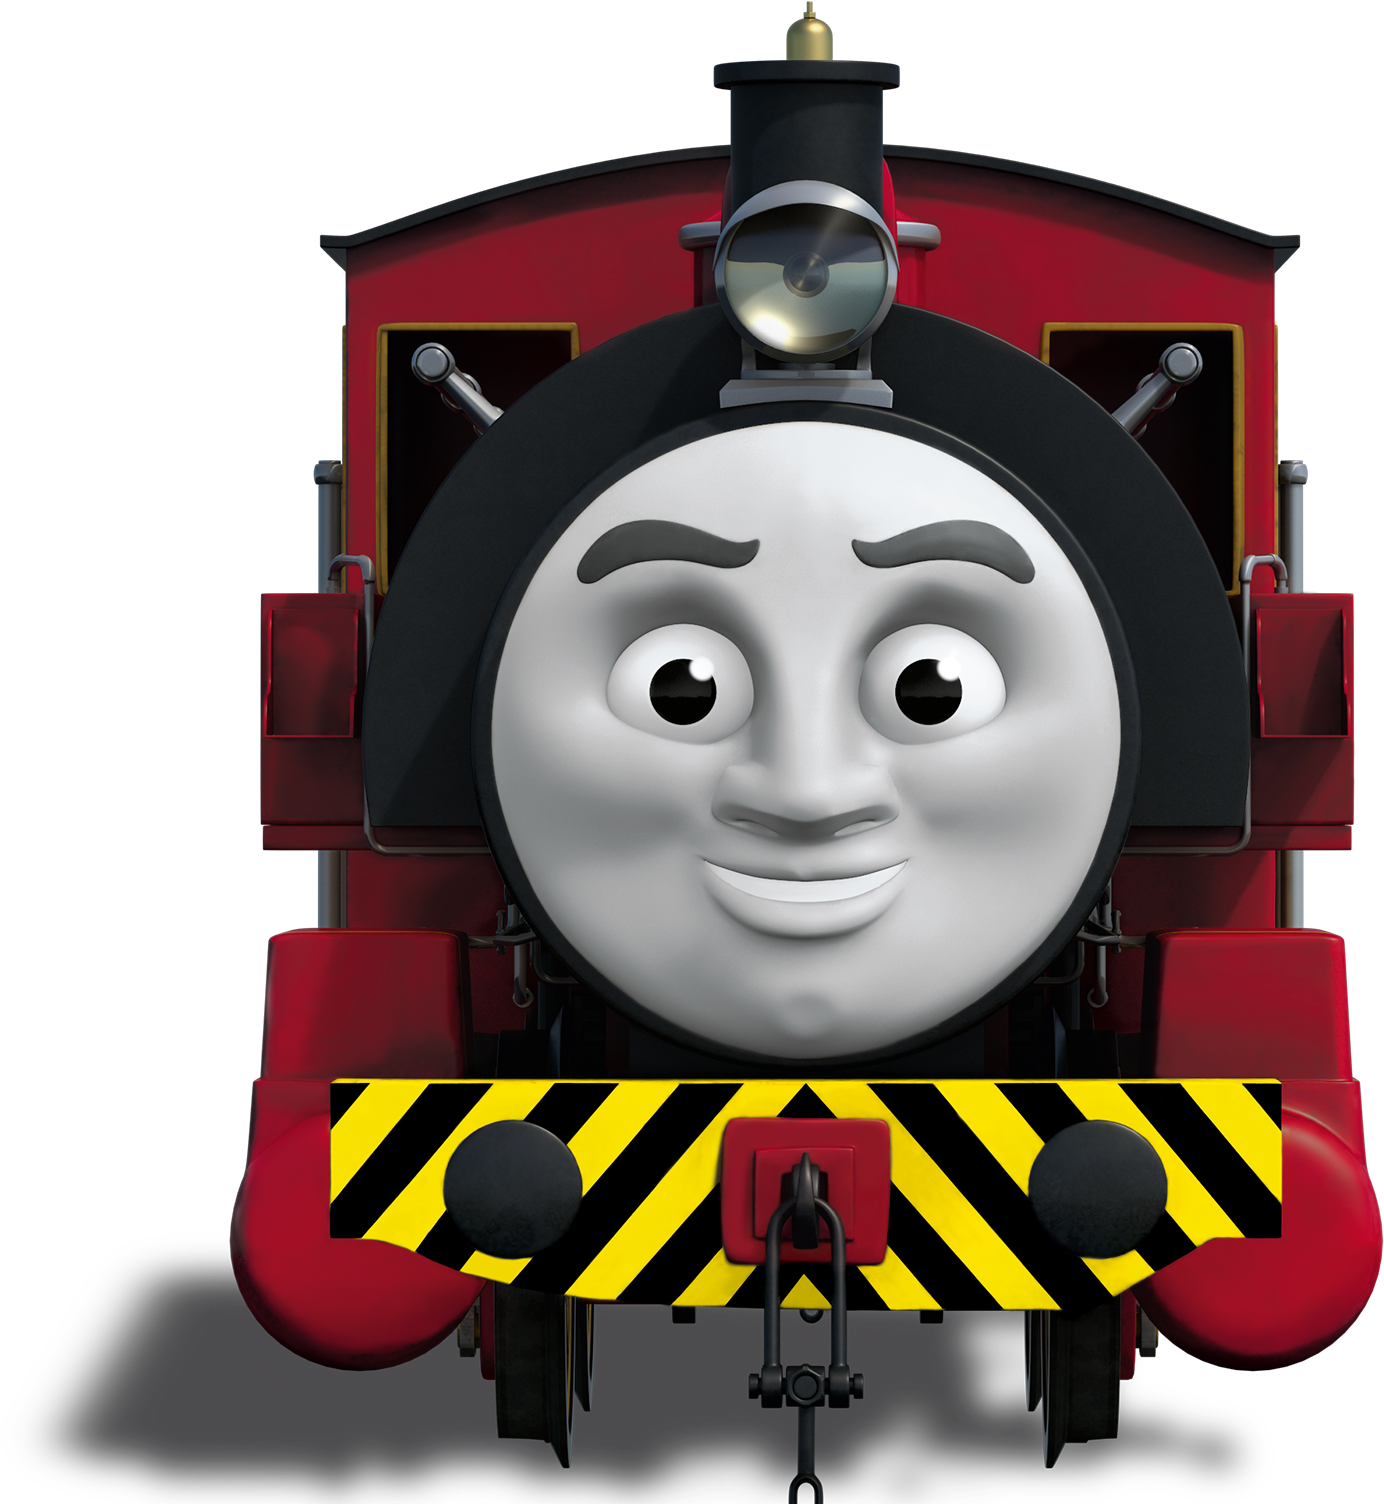 Smiling Red Engine Thomas Friends PNG image